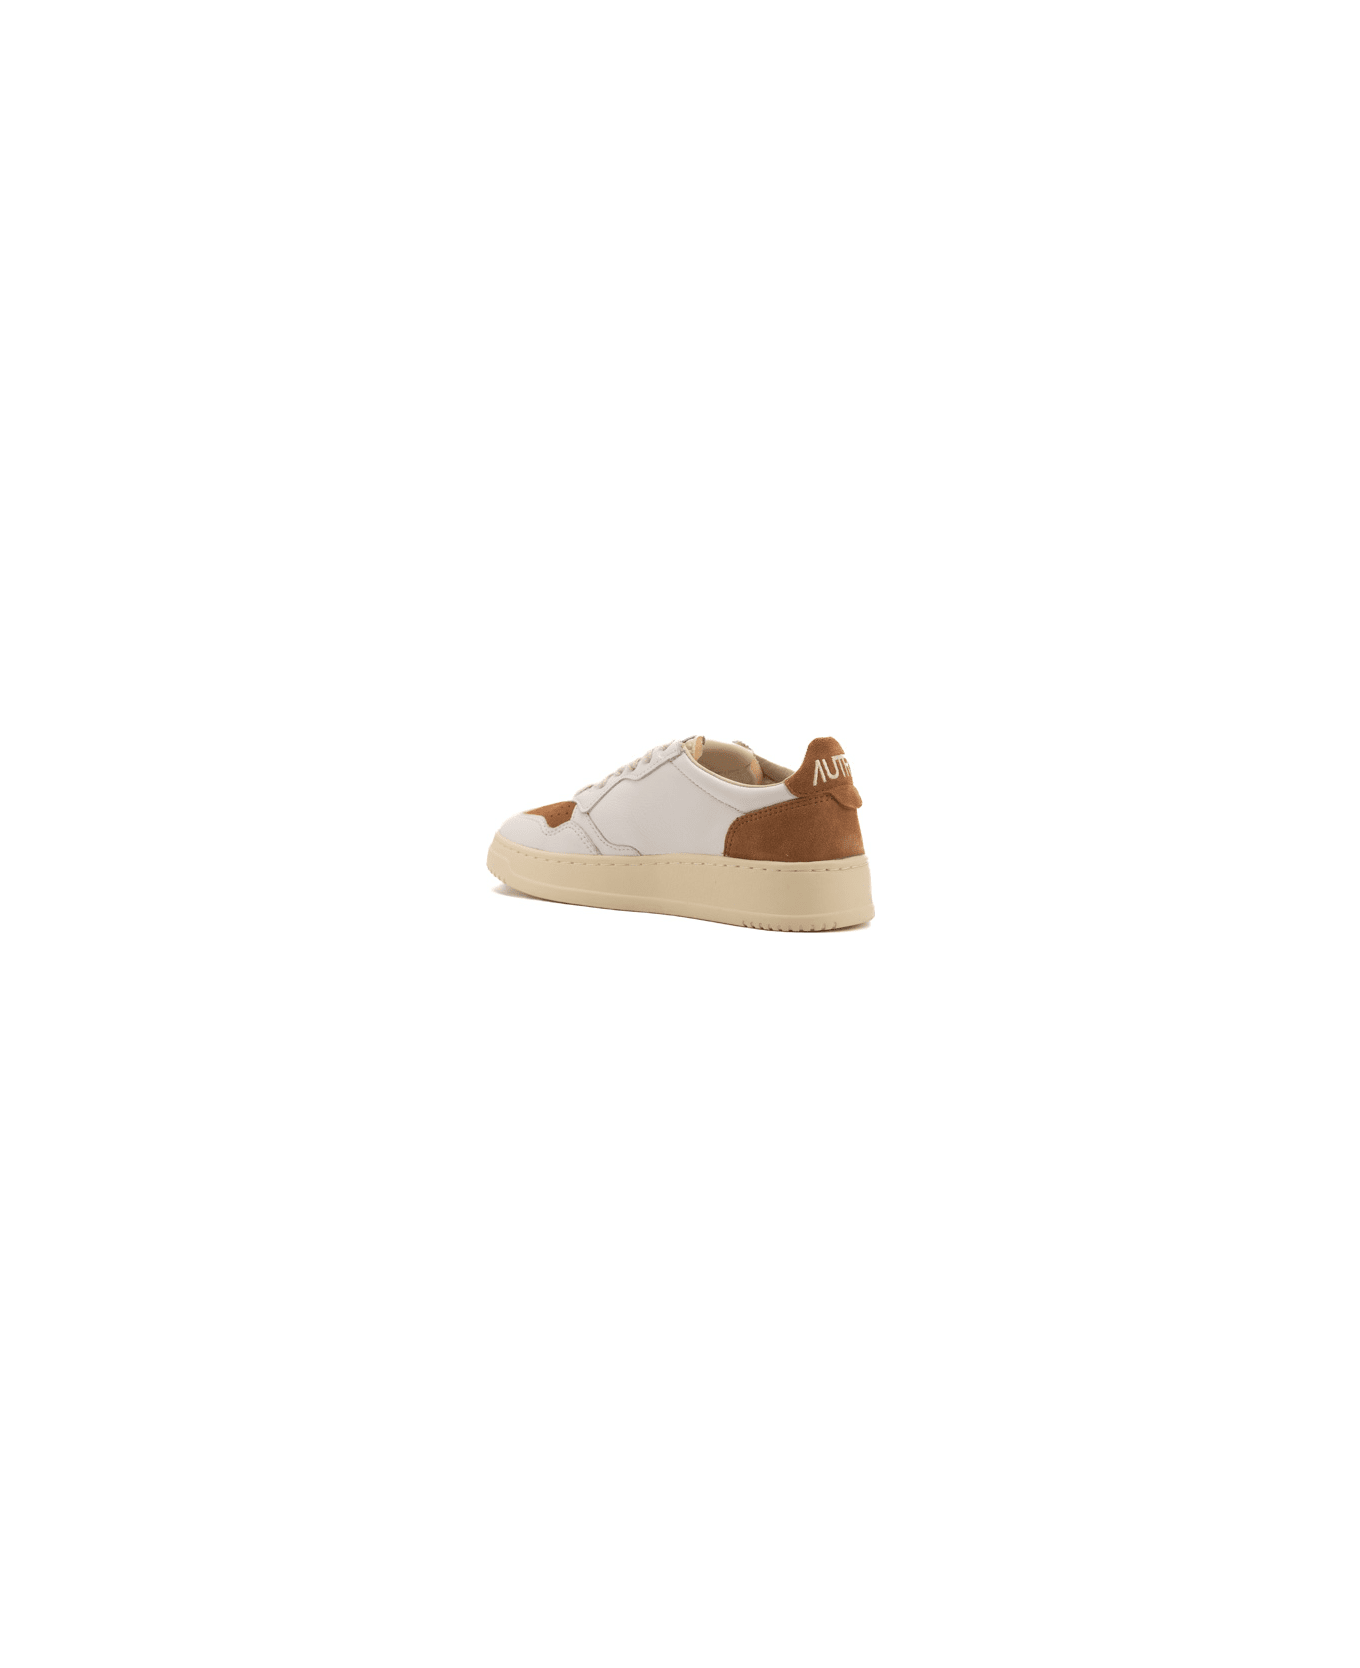 Autry Medalist Low Sneakers In White/caramel Leather And Suede - Wht/crml